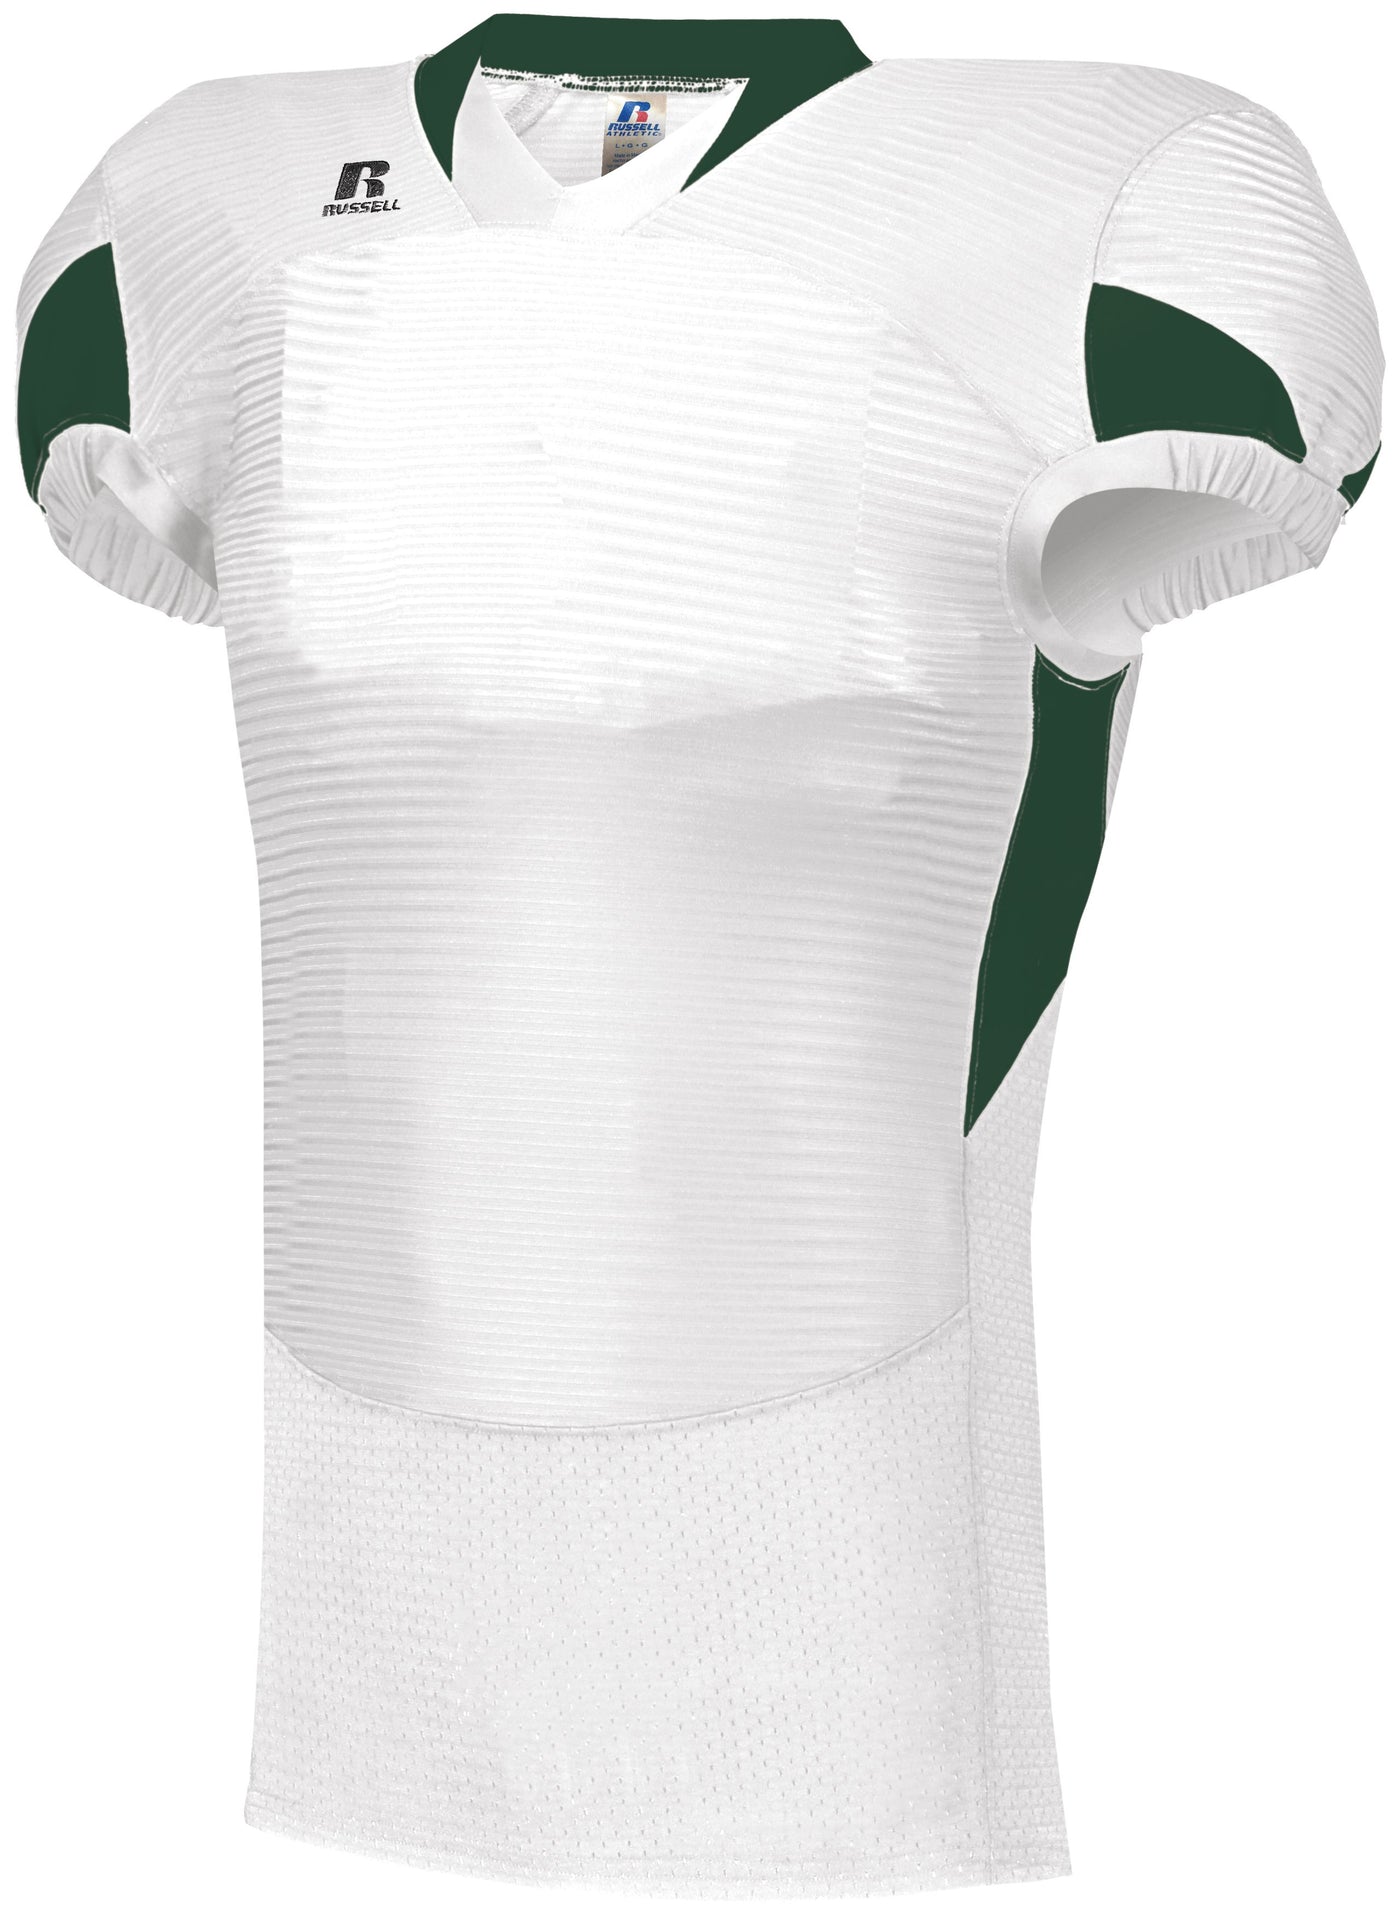 UNLEASH YOUR GRIDIRON DOMINANCE WITH THE RUSSELL TEAM WAIST LENGTH FOOTBALL JERSEY